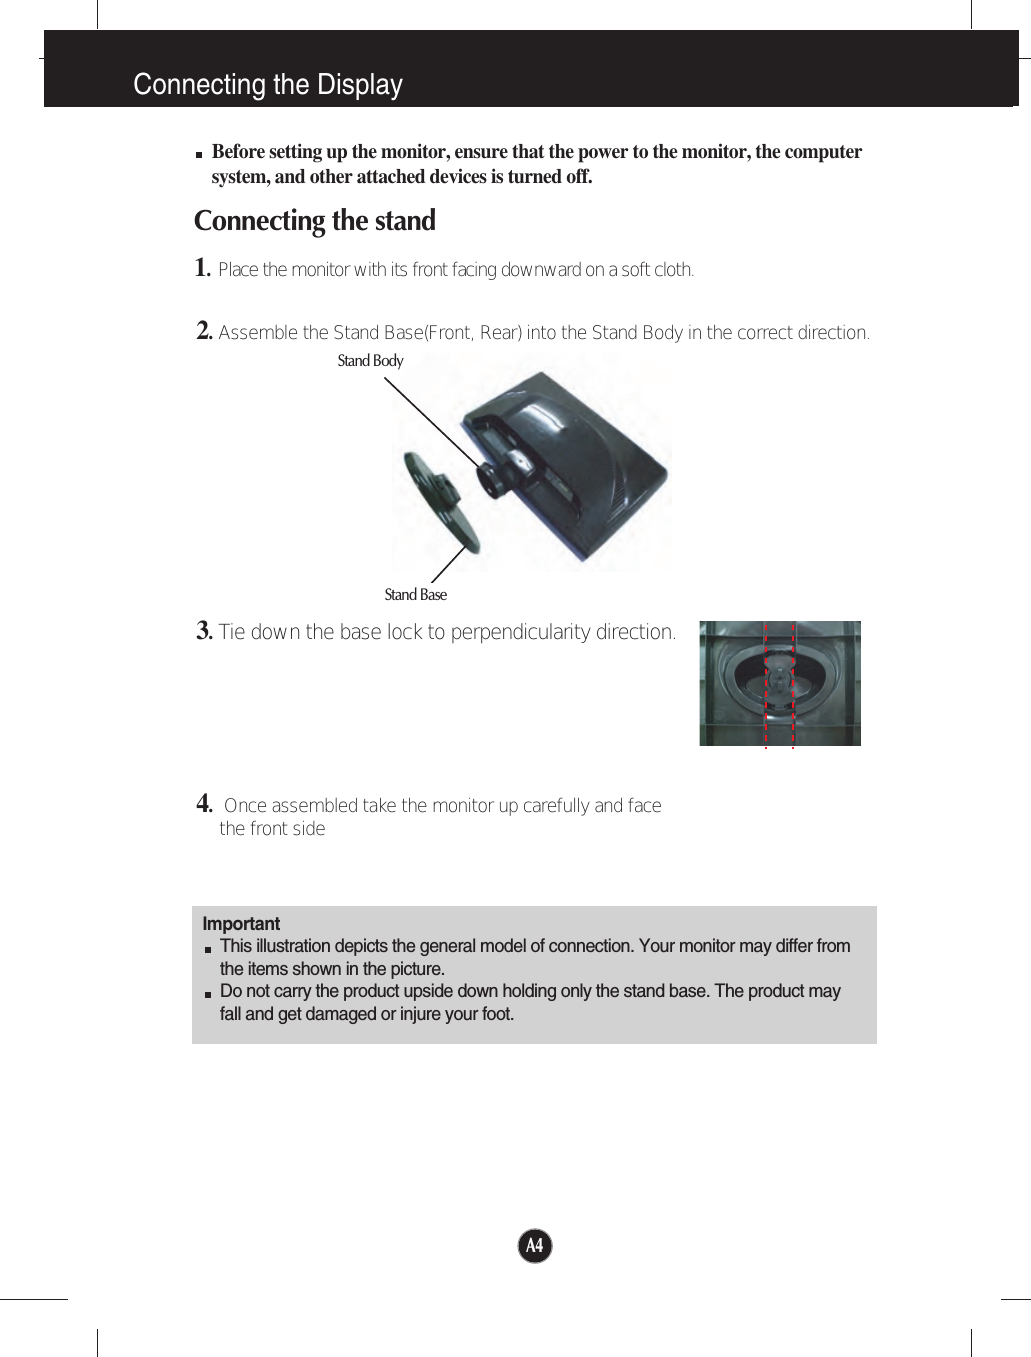 A4Connecting the DisplayImportantThis illustration depicts the general model of connection. Your monitor may differ fromthe items shown in the picture.Do not carry the product upside down holding only the stand base. The product mayfall and get damaged or injure your foot.Before setting up the monitor, ensure that the power to the monitor, the computersystem, and other attached devices is turned off.Connecting the stand 1.Place the monitor with its front facing downward on a soft cloth.2.Assemble the Stand Base(Front, Rear) into the Stand Body in the correct direction.3.Tie down the base lock to perpendicularity direction.4.Once assembled take the monitor up carefully and facethe front sideStand BodyStand Base